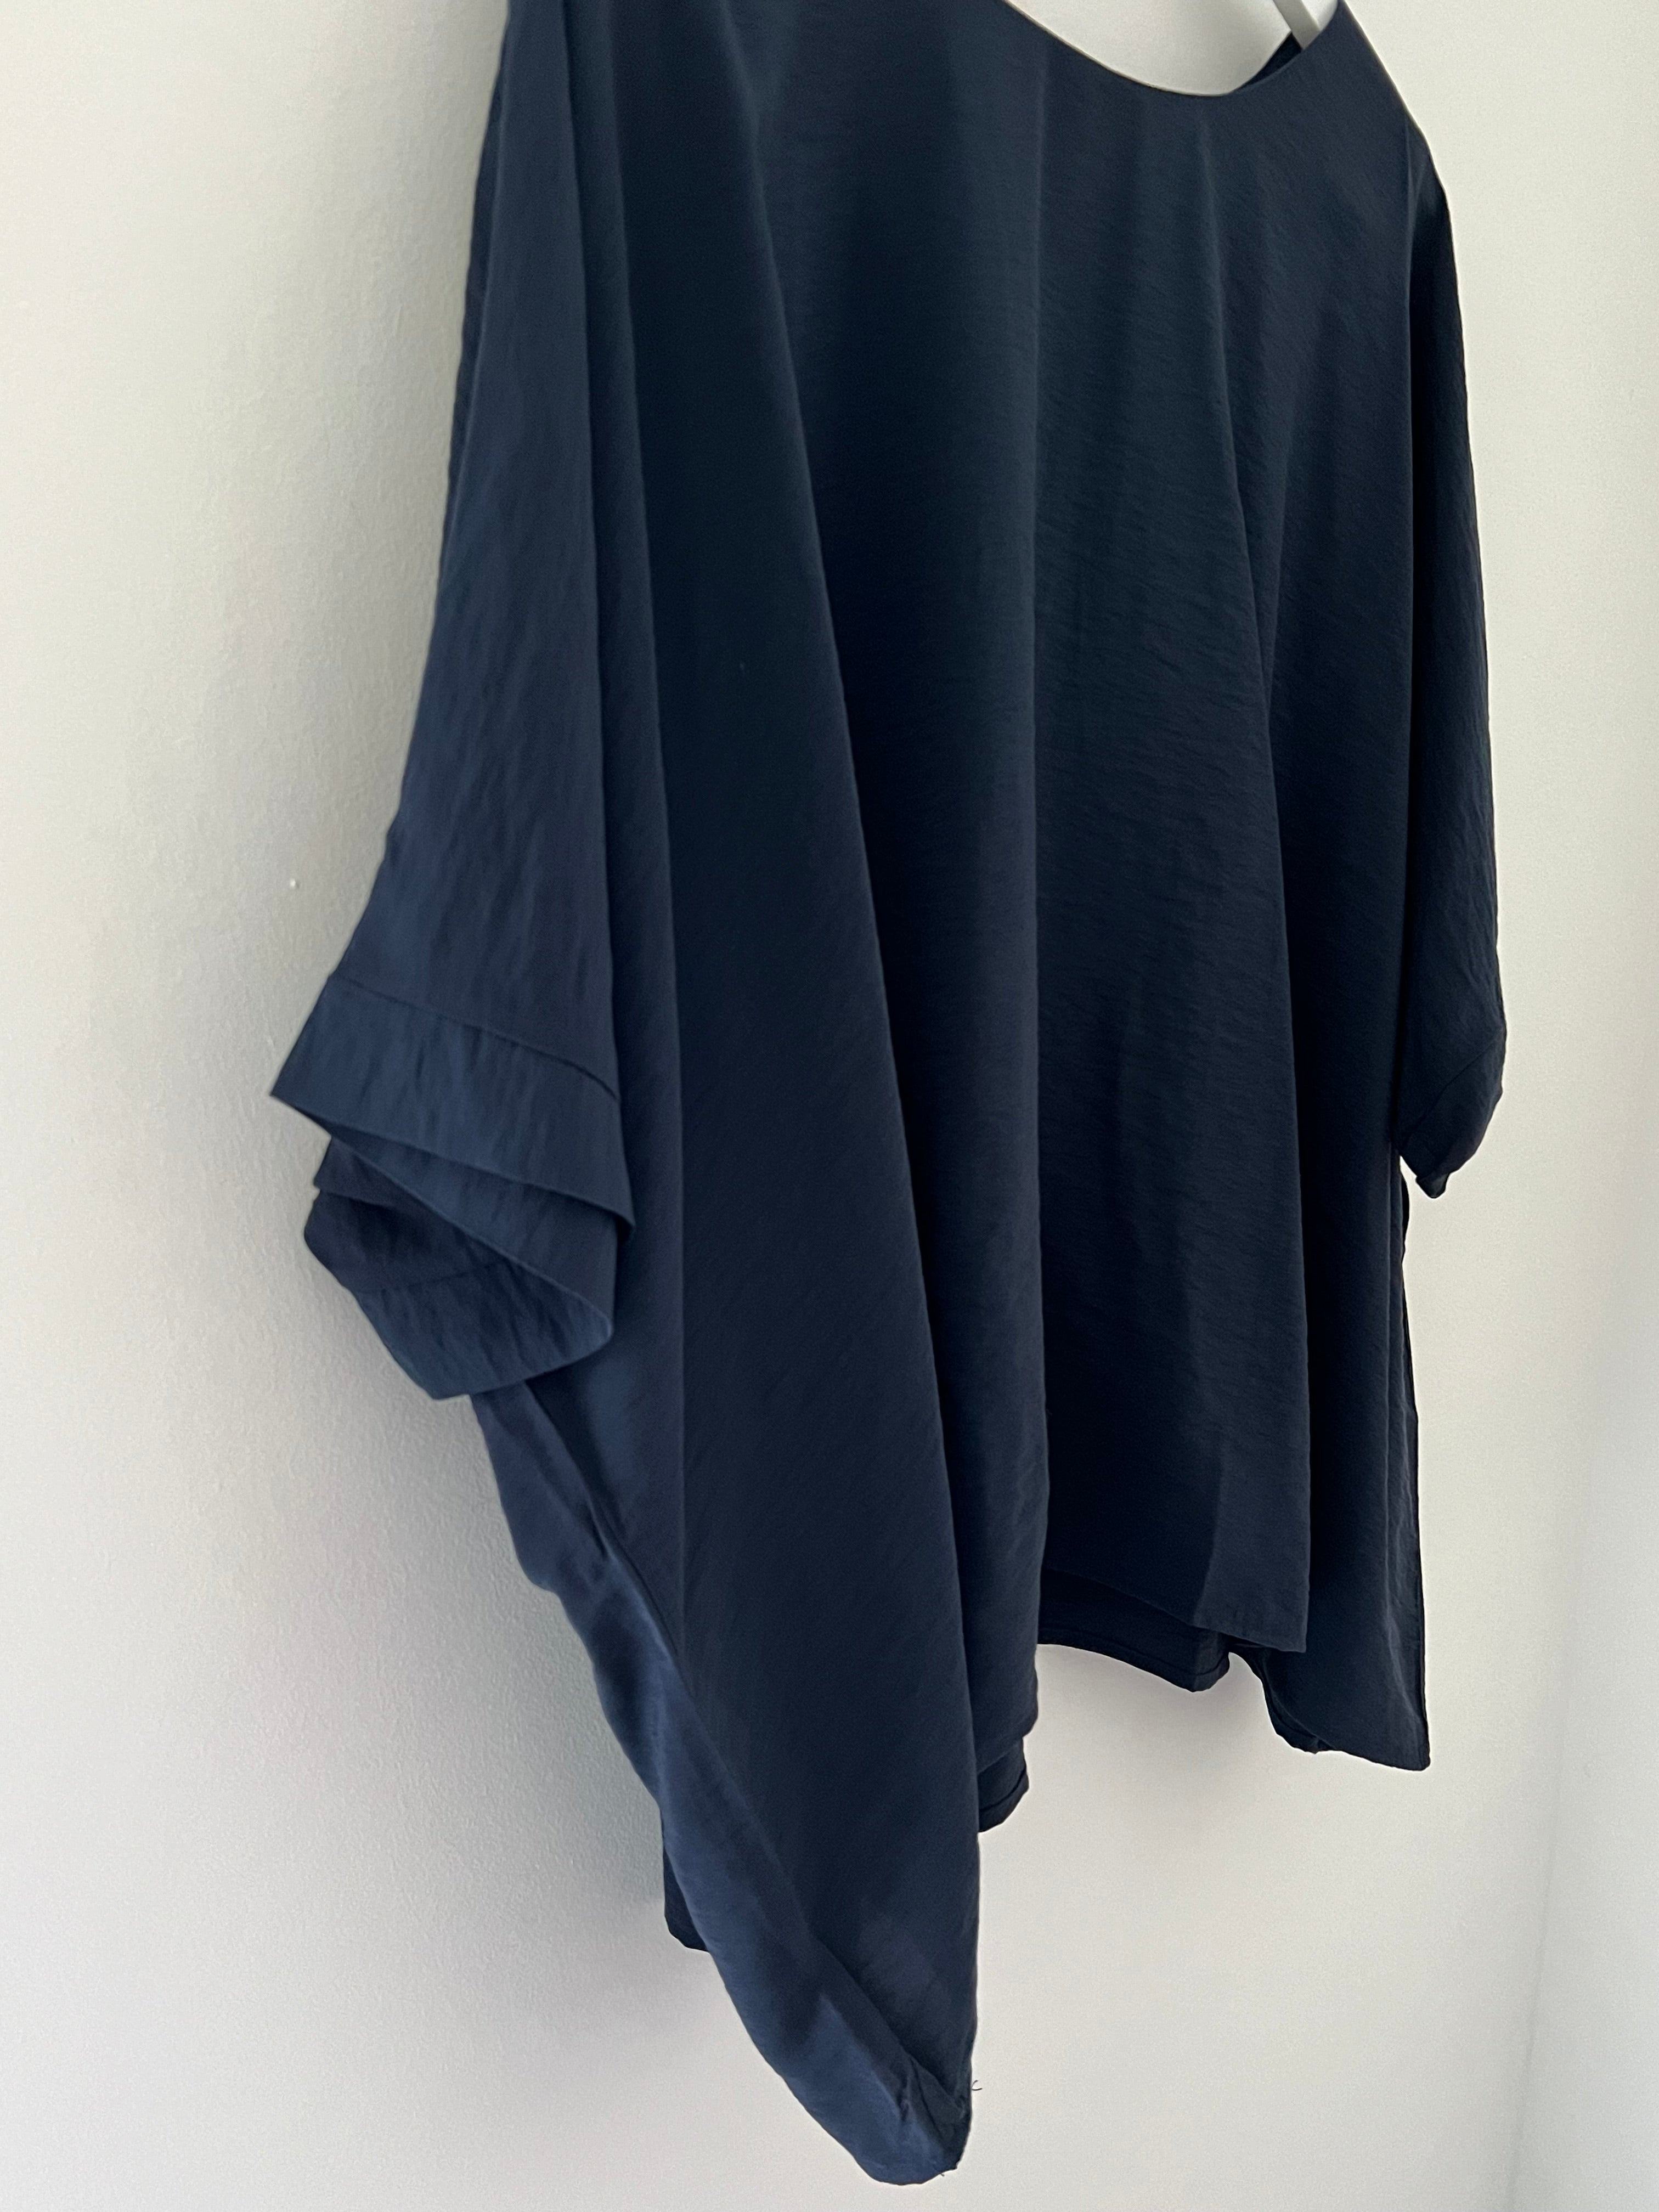 Simple Oversized Round Neck Top in Ink